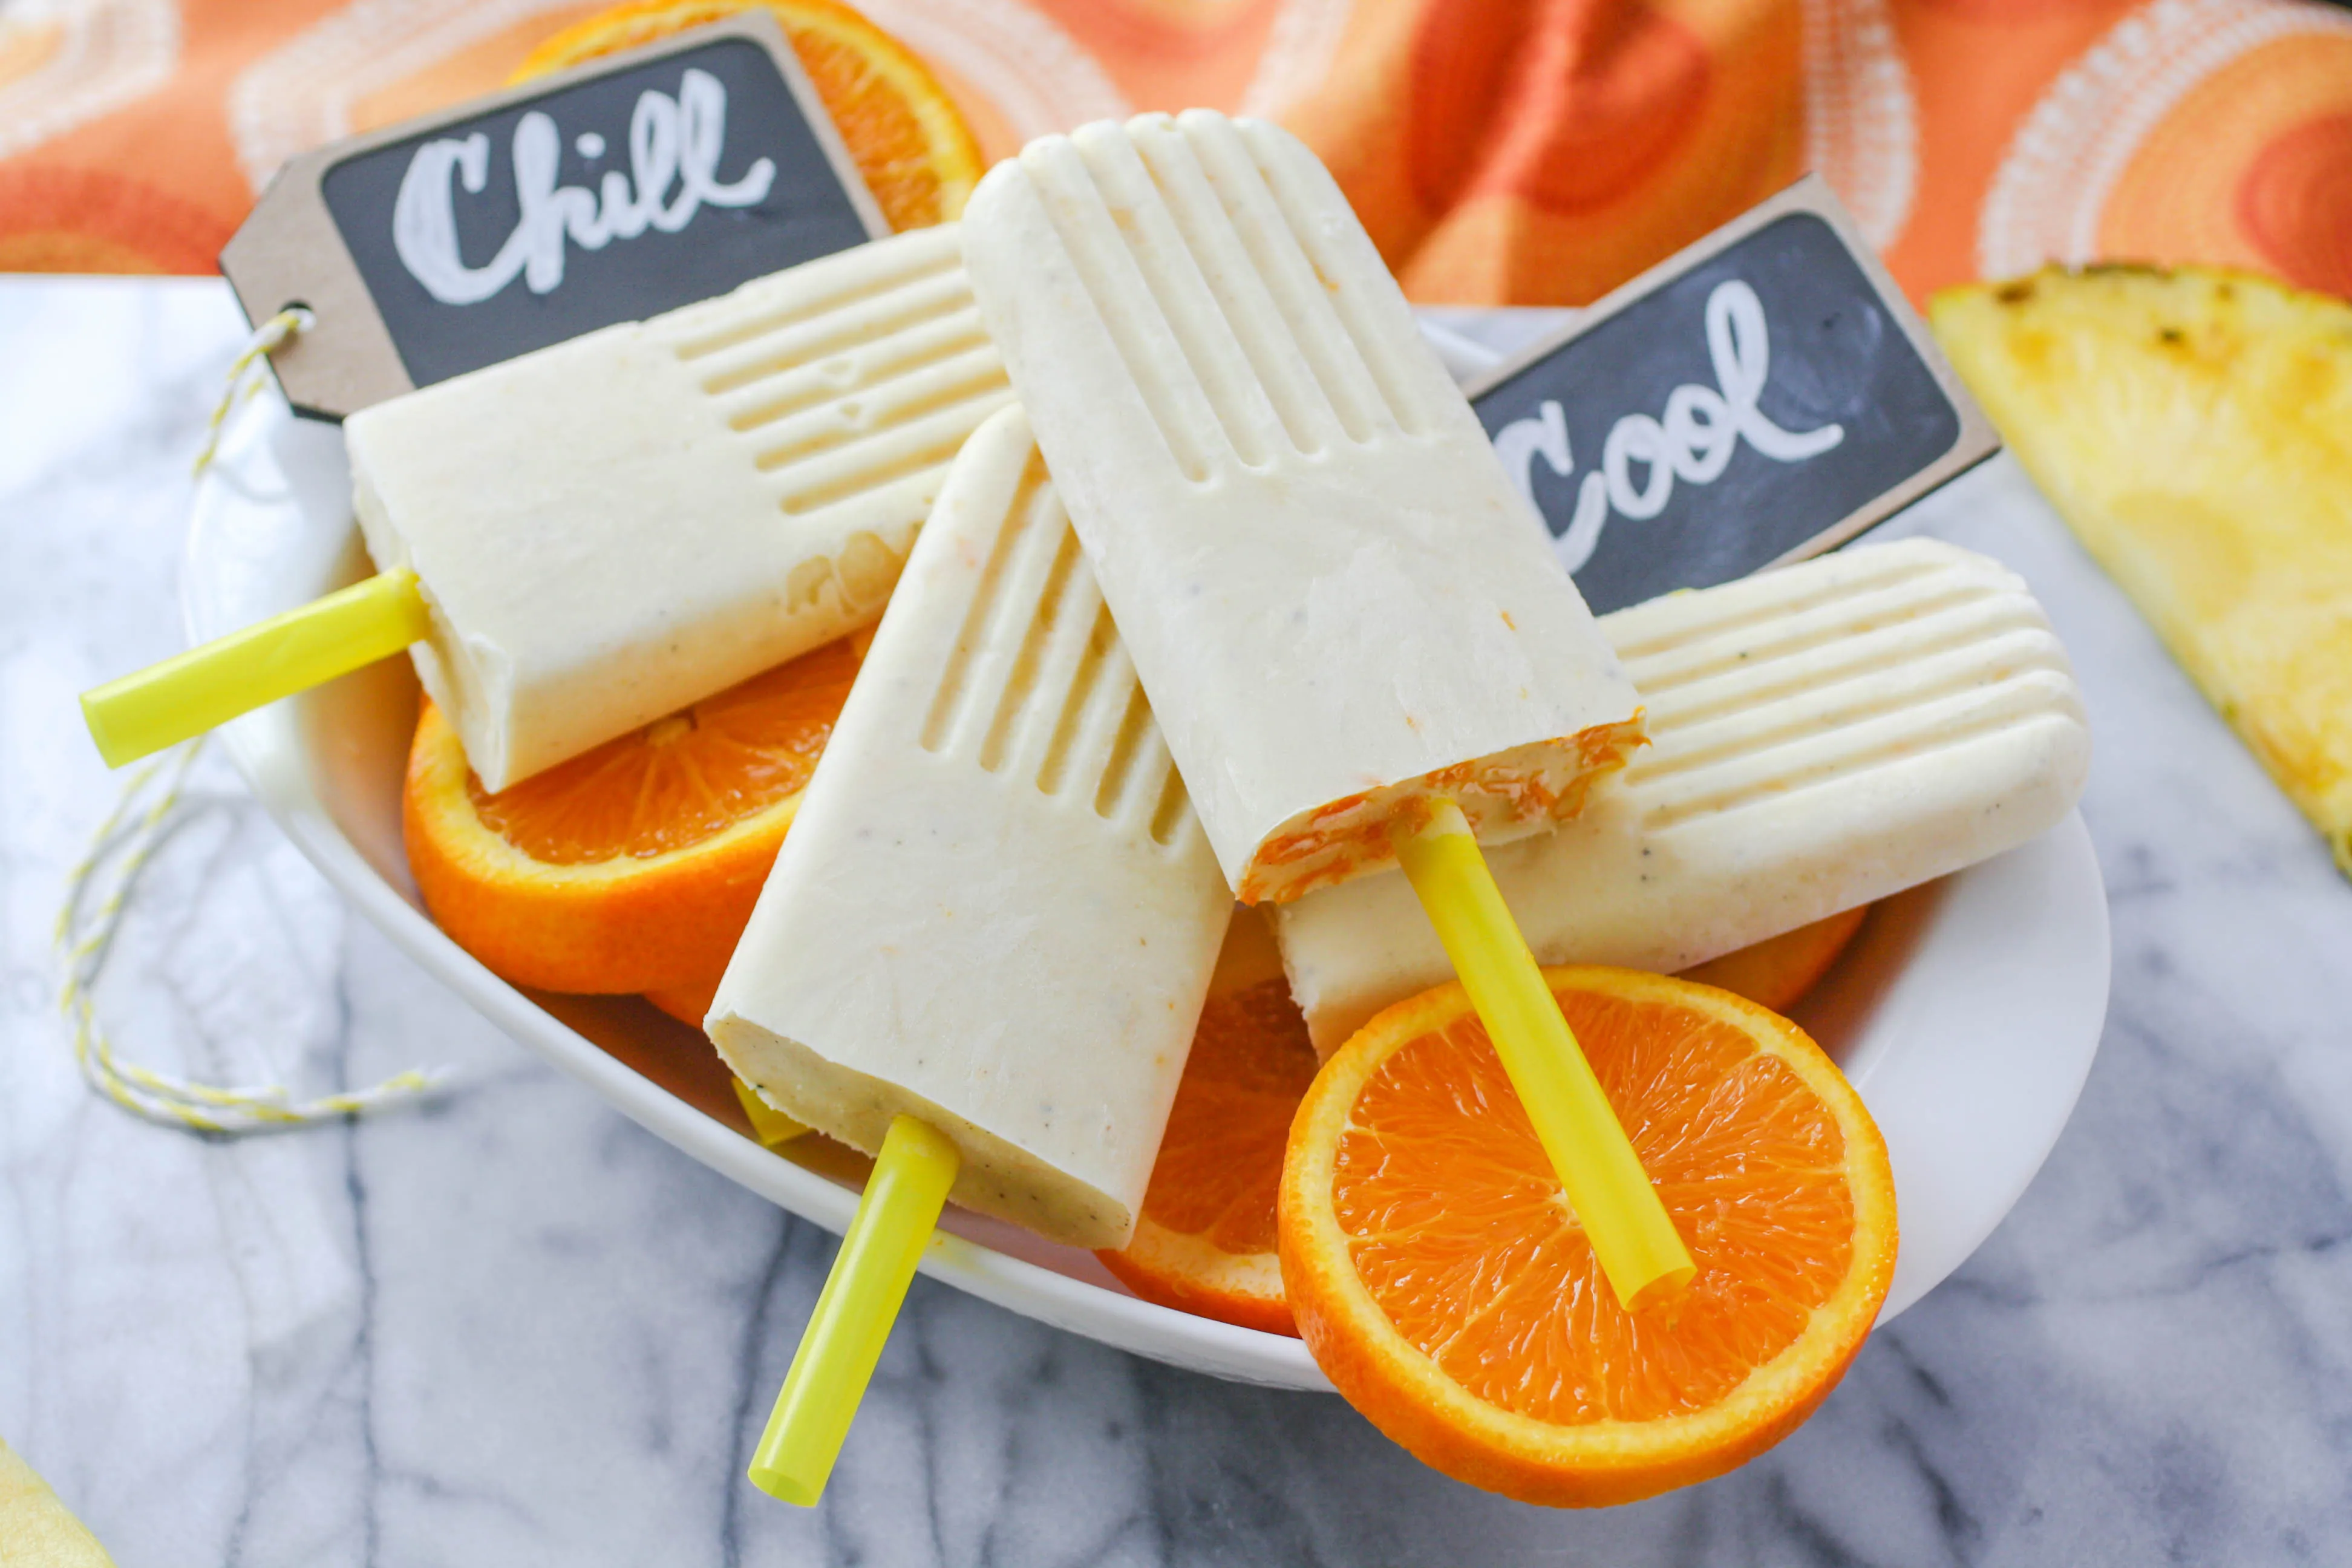 Pineapple-Orange & Cardamom Creamsicles are delicious and a fun way to chill out! Pineapple-Orange & Cardamom Creamsicles are a fuity and fun treat!